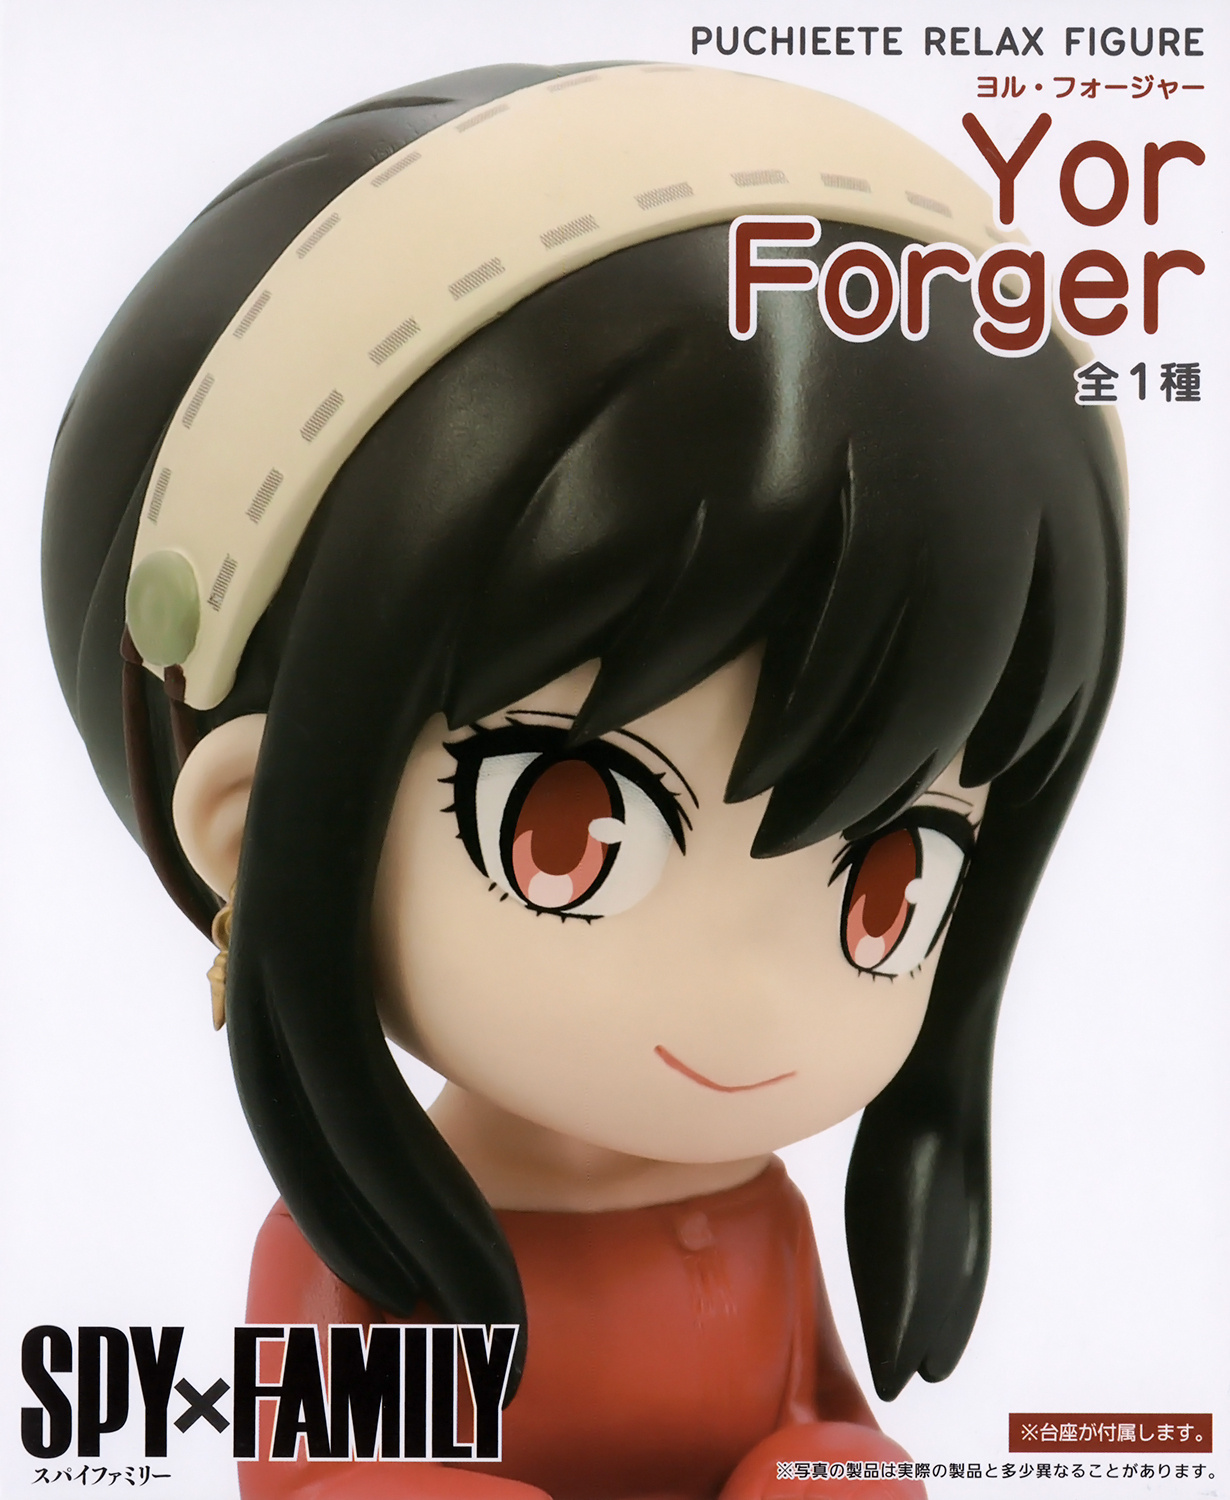 Spy x Family: What makes Yor Forger an interesting character